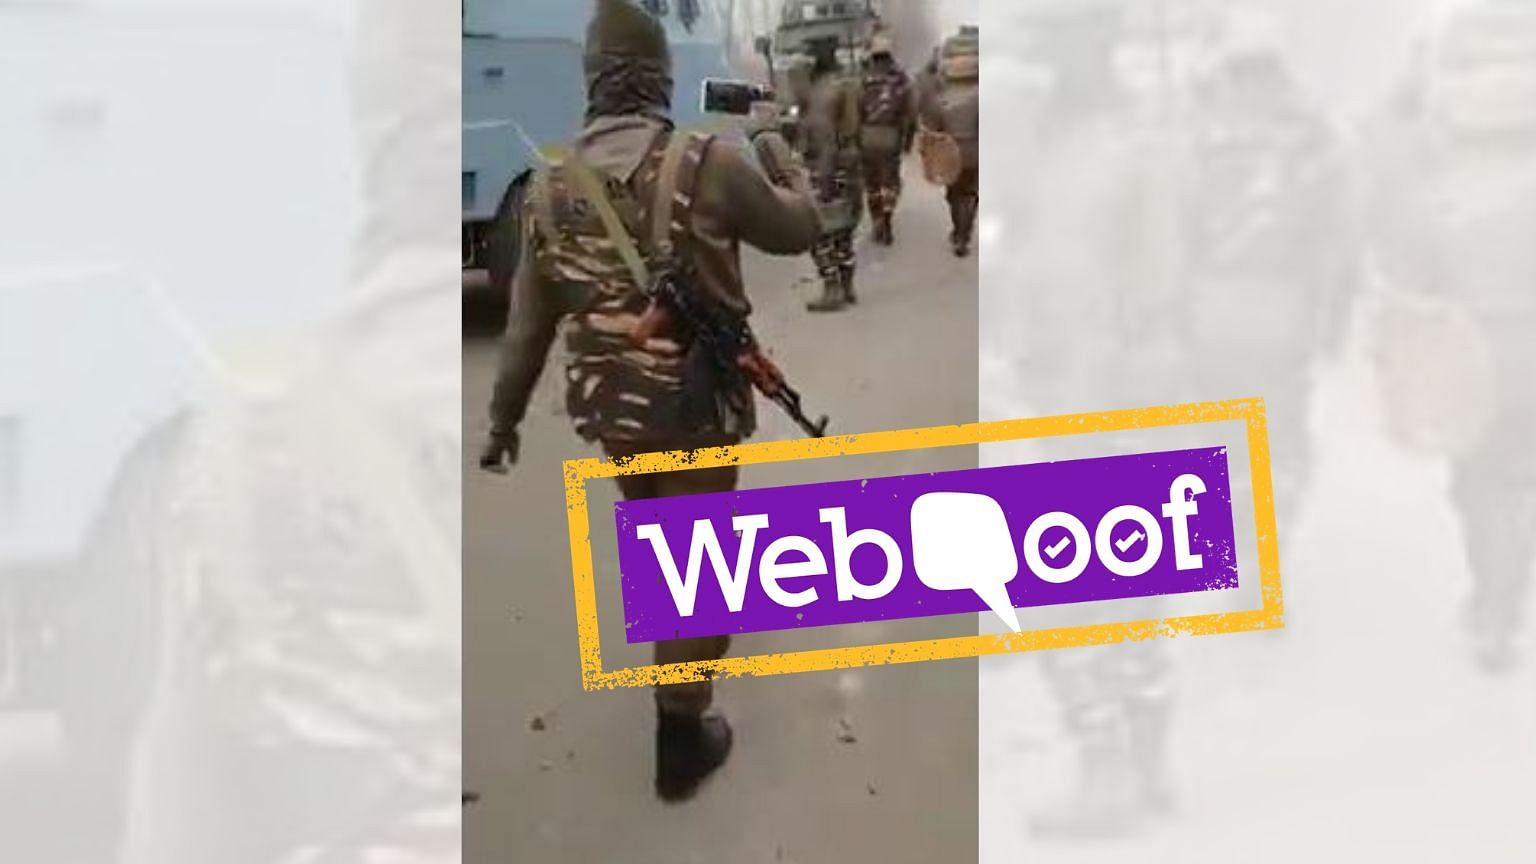 A viral video claiming to be an act of revenge for the Pulwama attack has resurfaced.